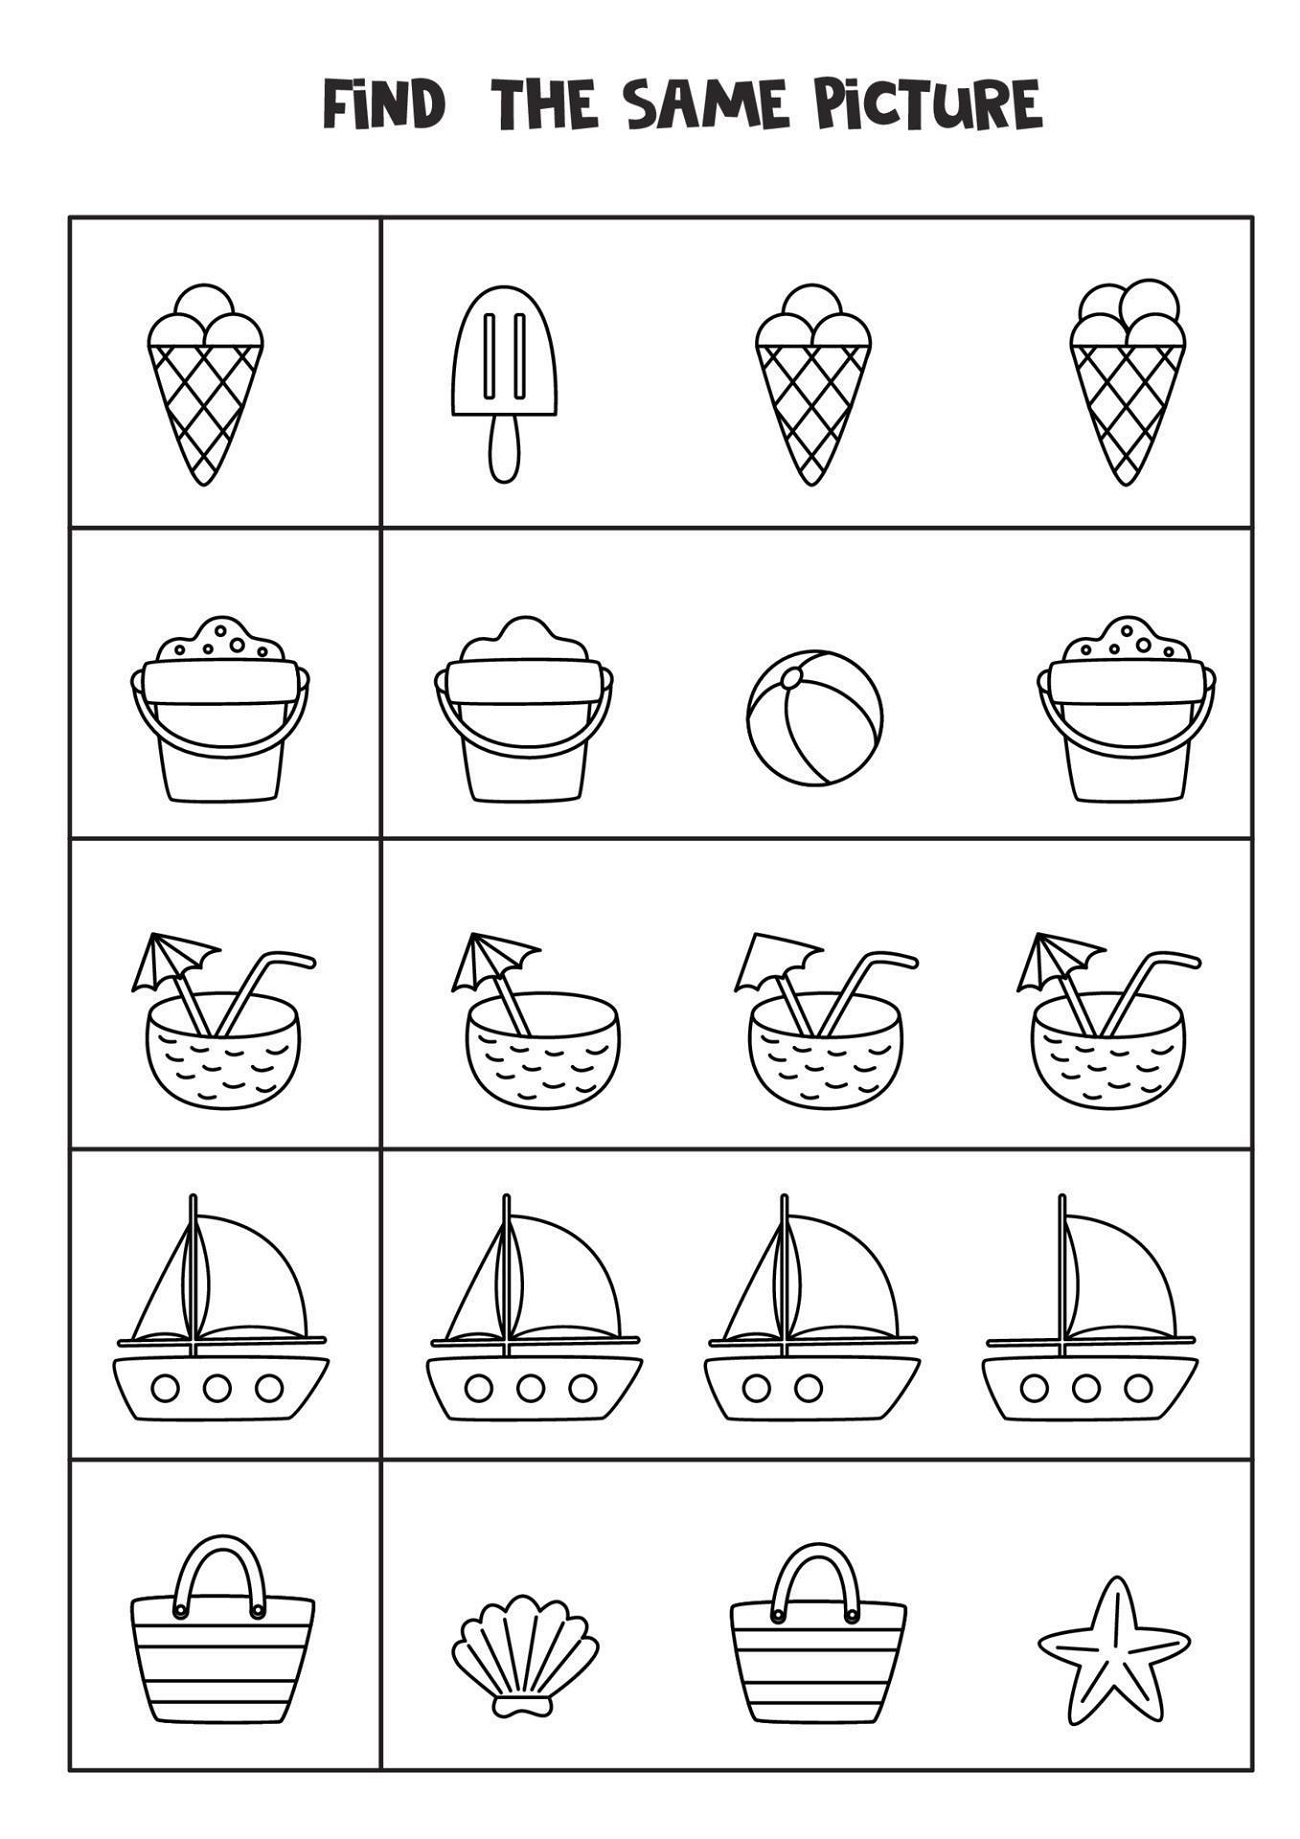 Worksheets For 2 Year Olds Find